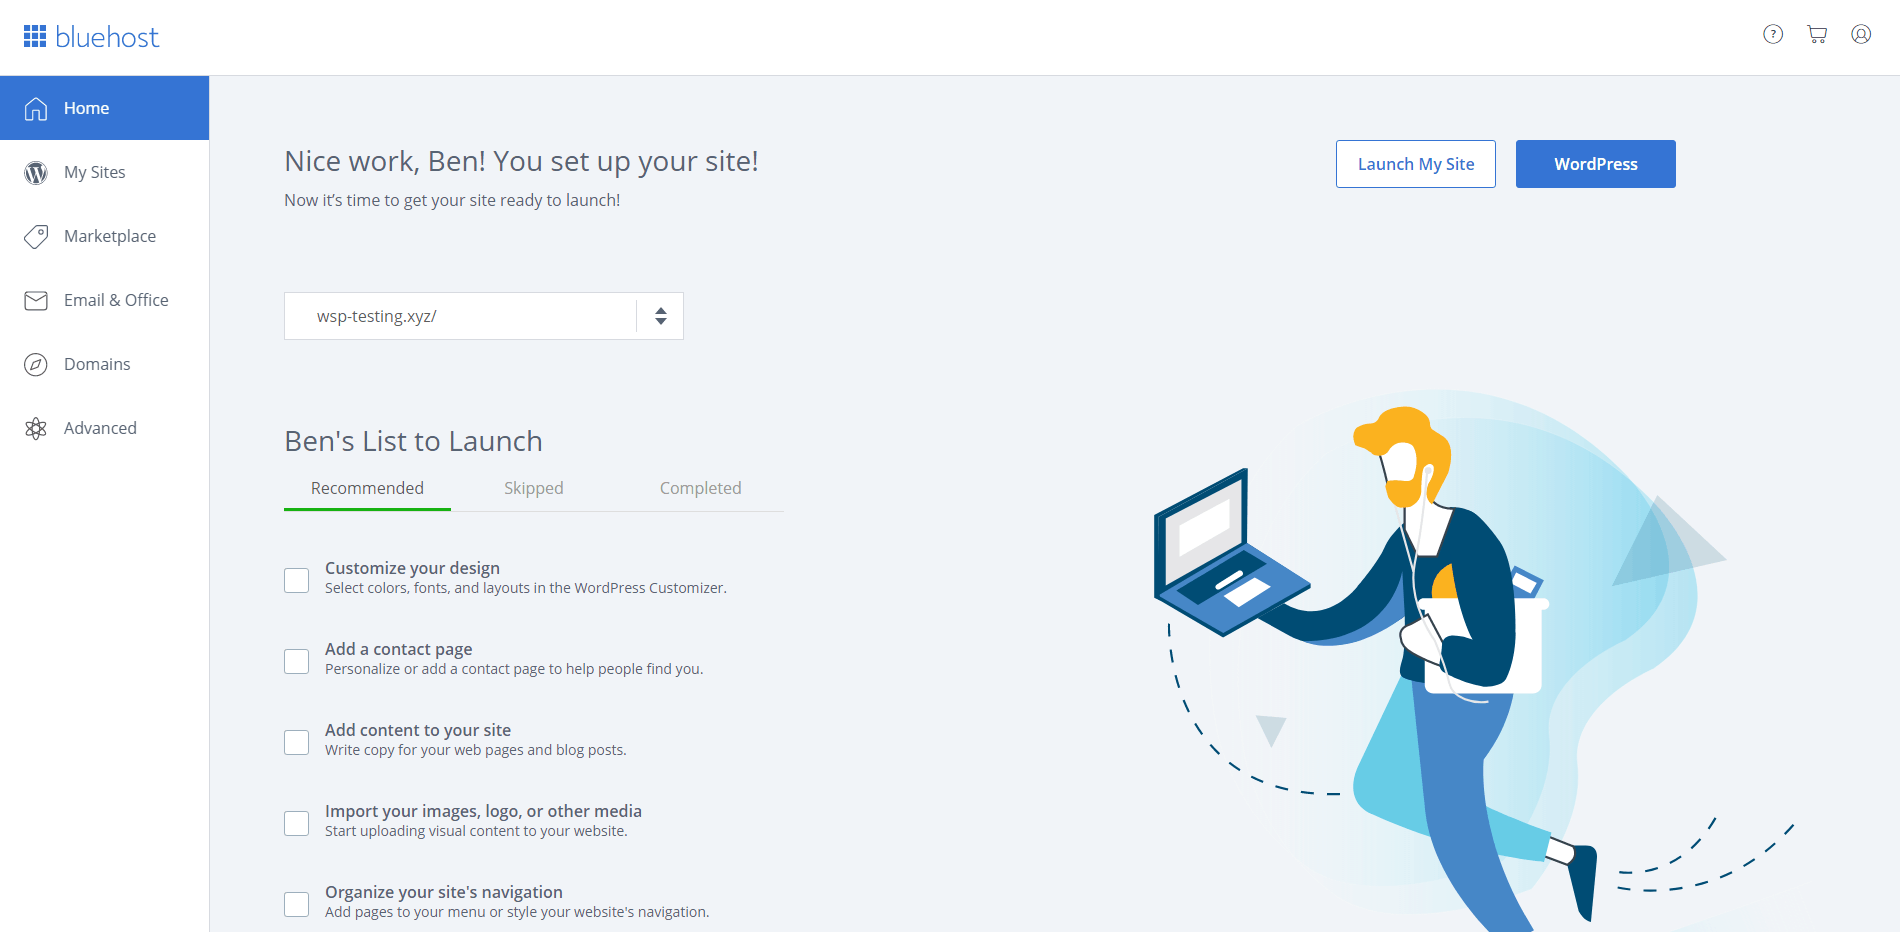 bluehost-features2